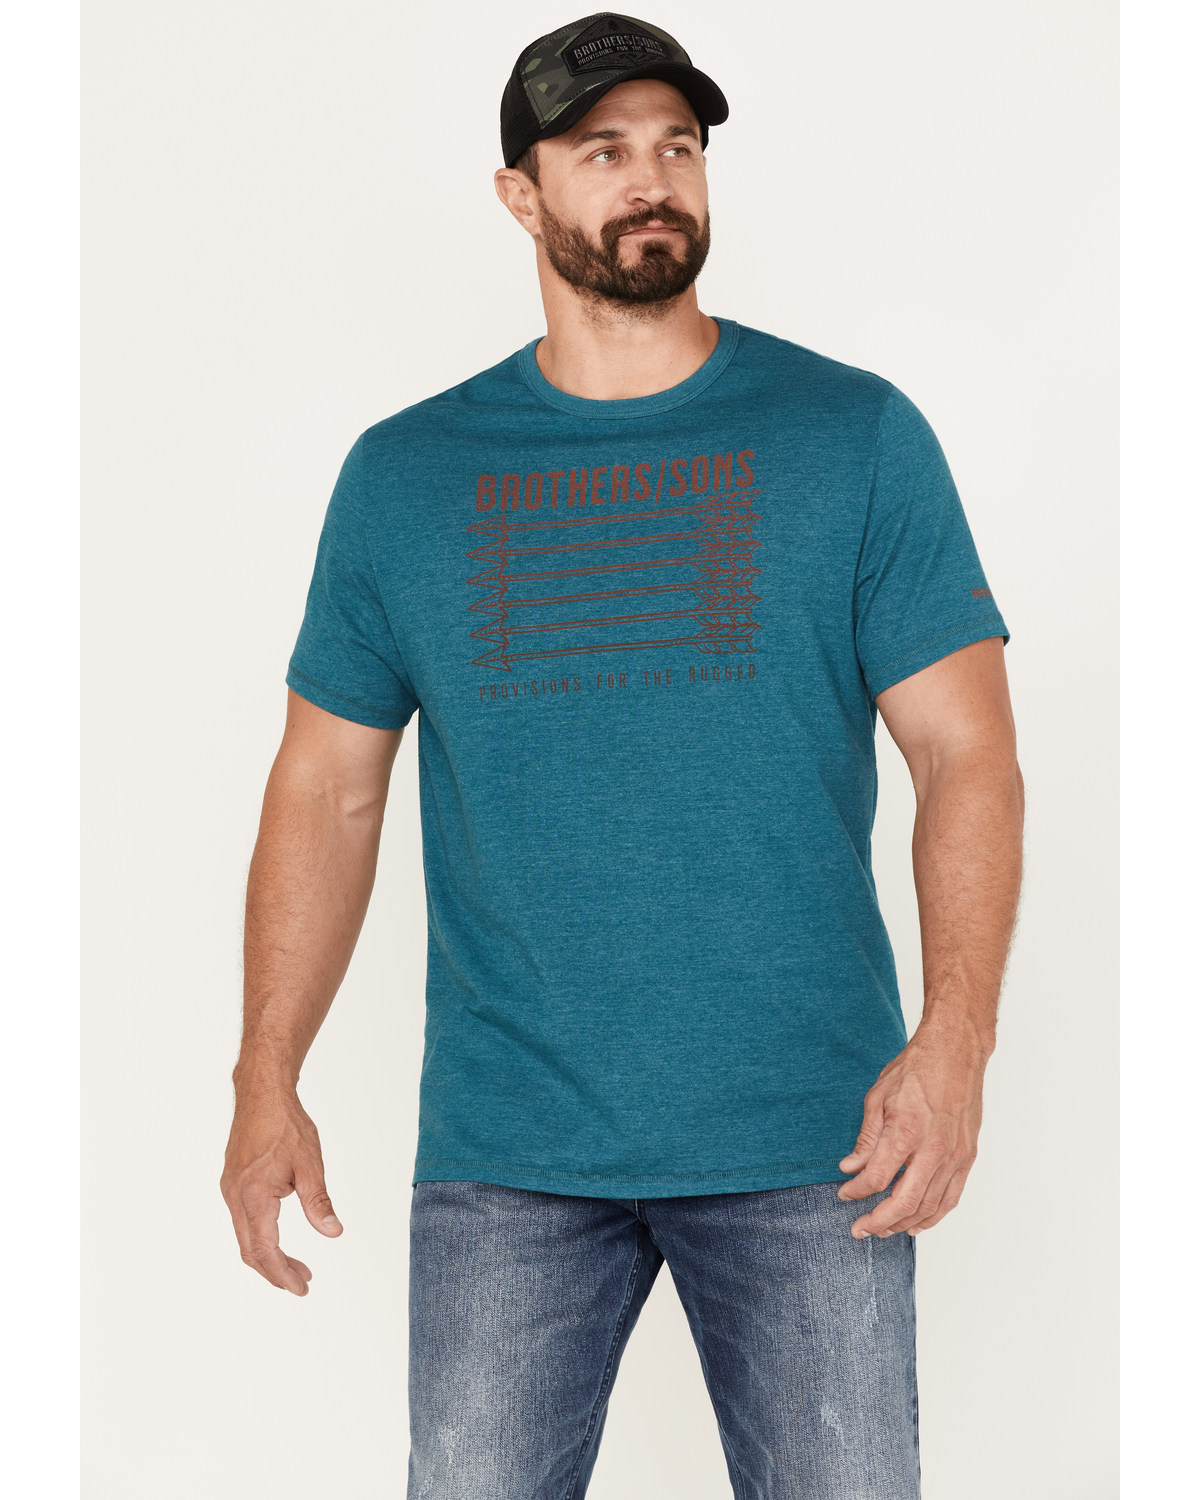 Brothers and Sons Men's Gradient Arrows Logo Graphic T-Shirt